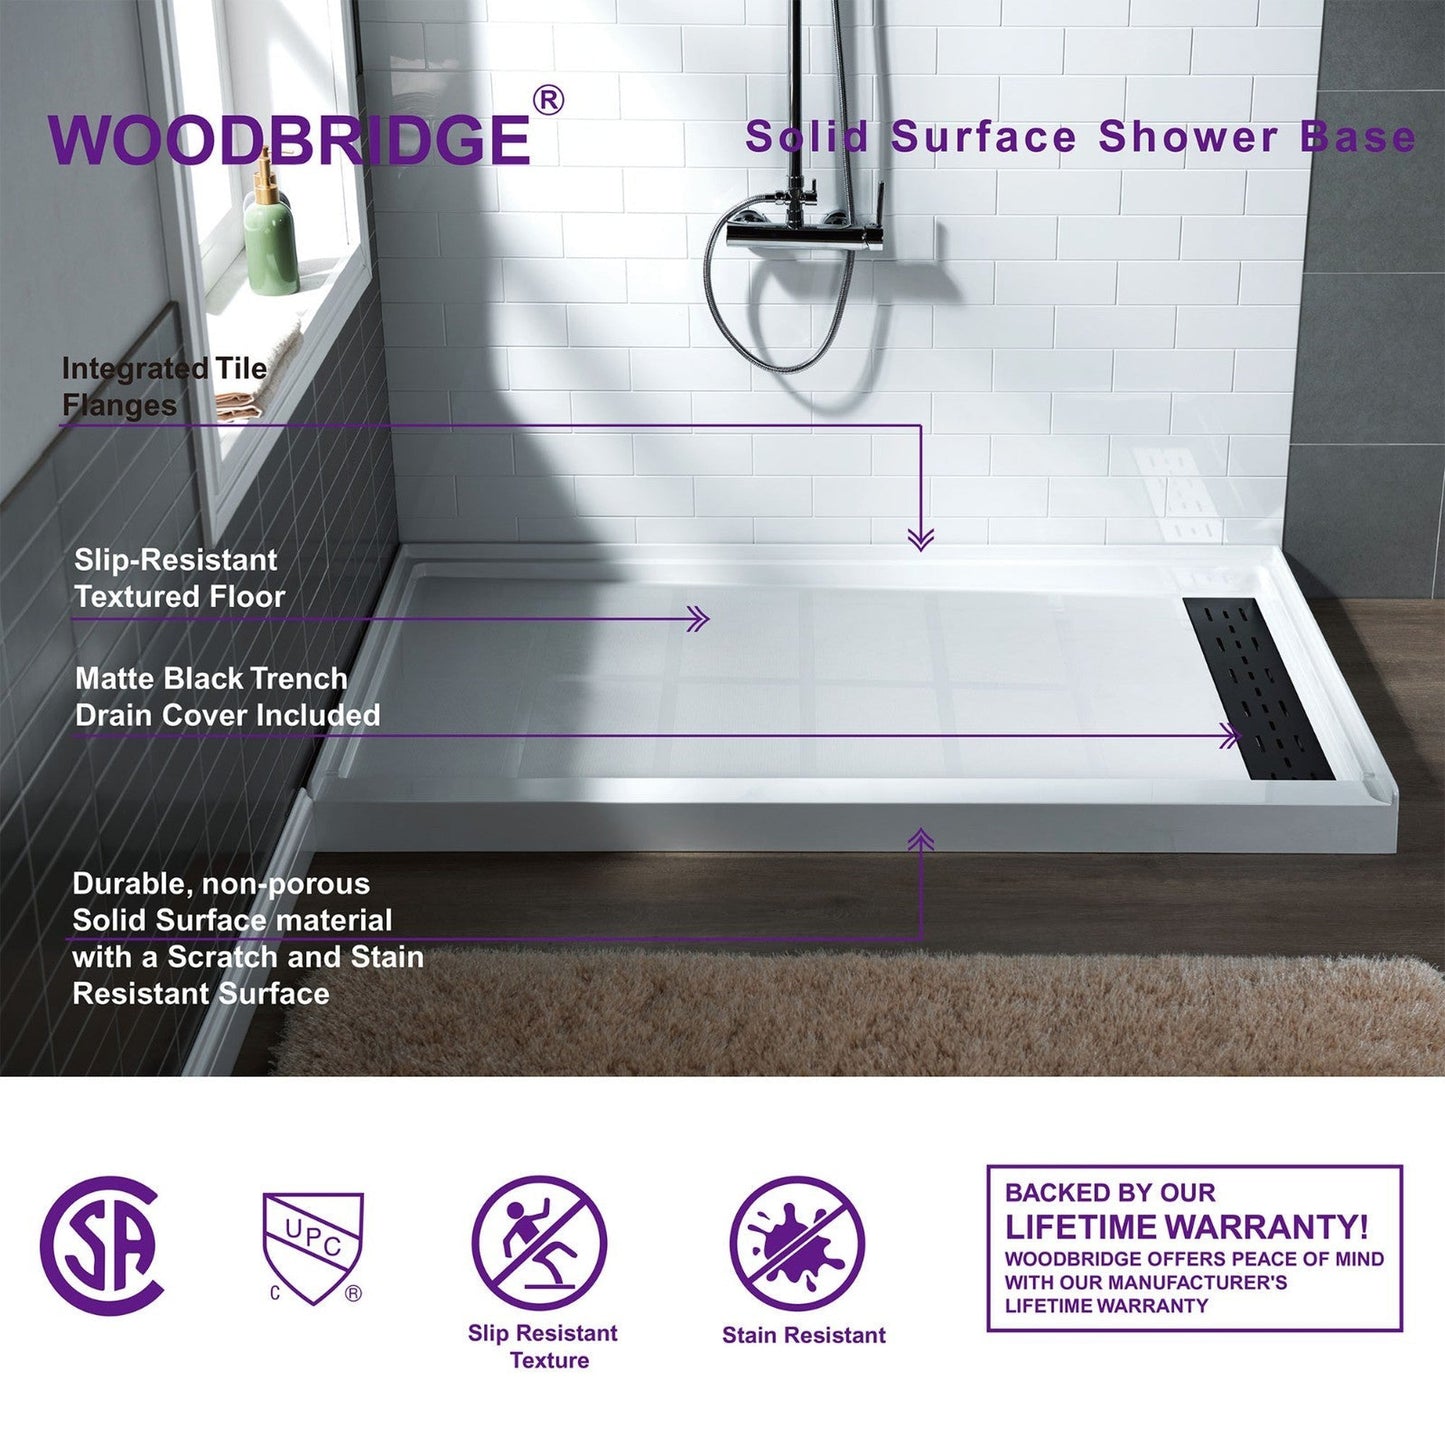 WoodBridge 60" x 32" White Solid Surface Shower Base Right Drain Location With Matte Black Trench Drain Cover